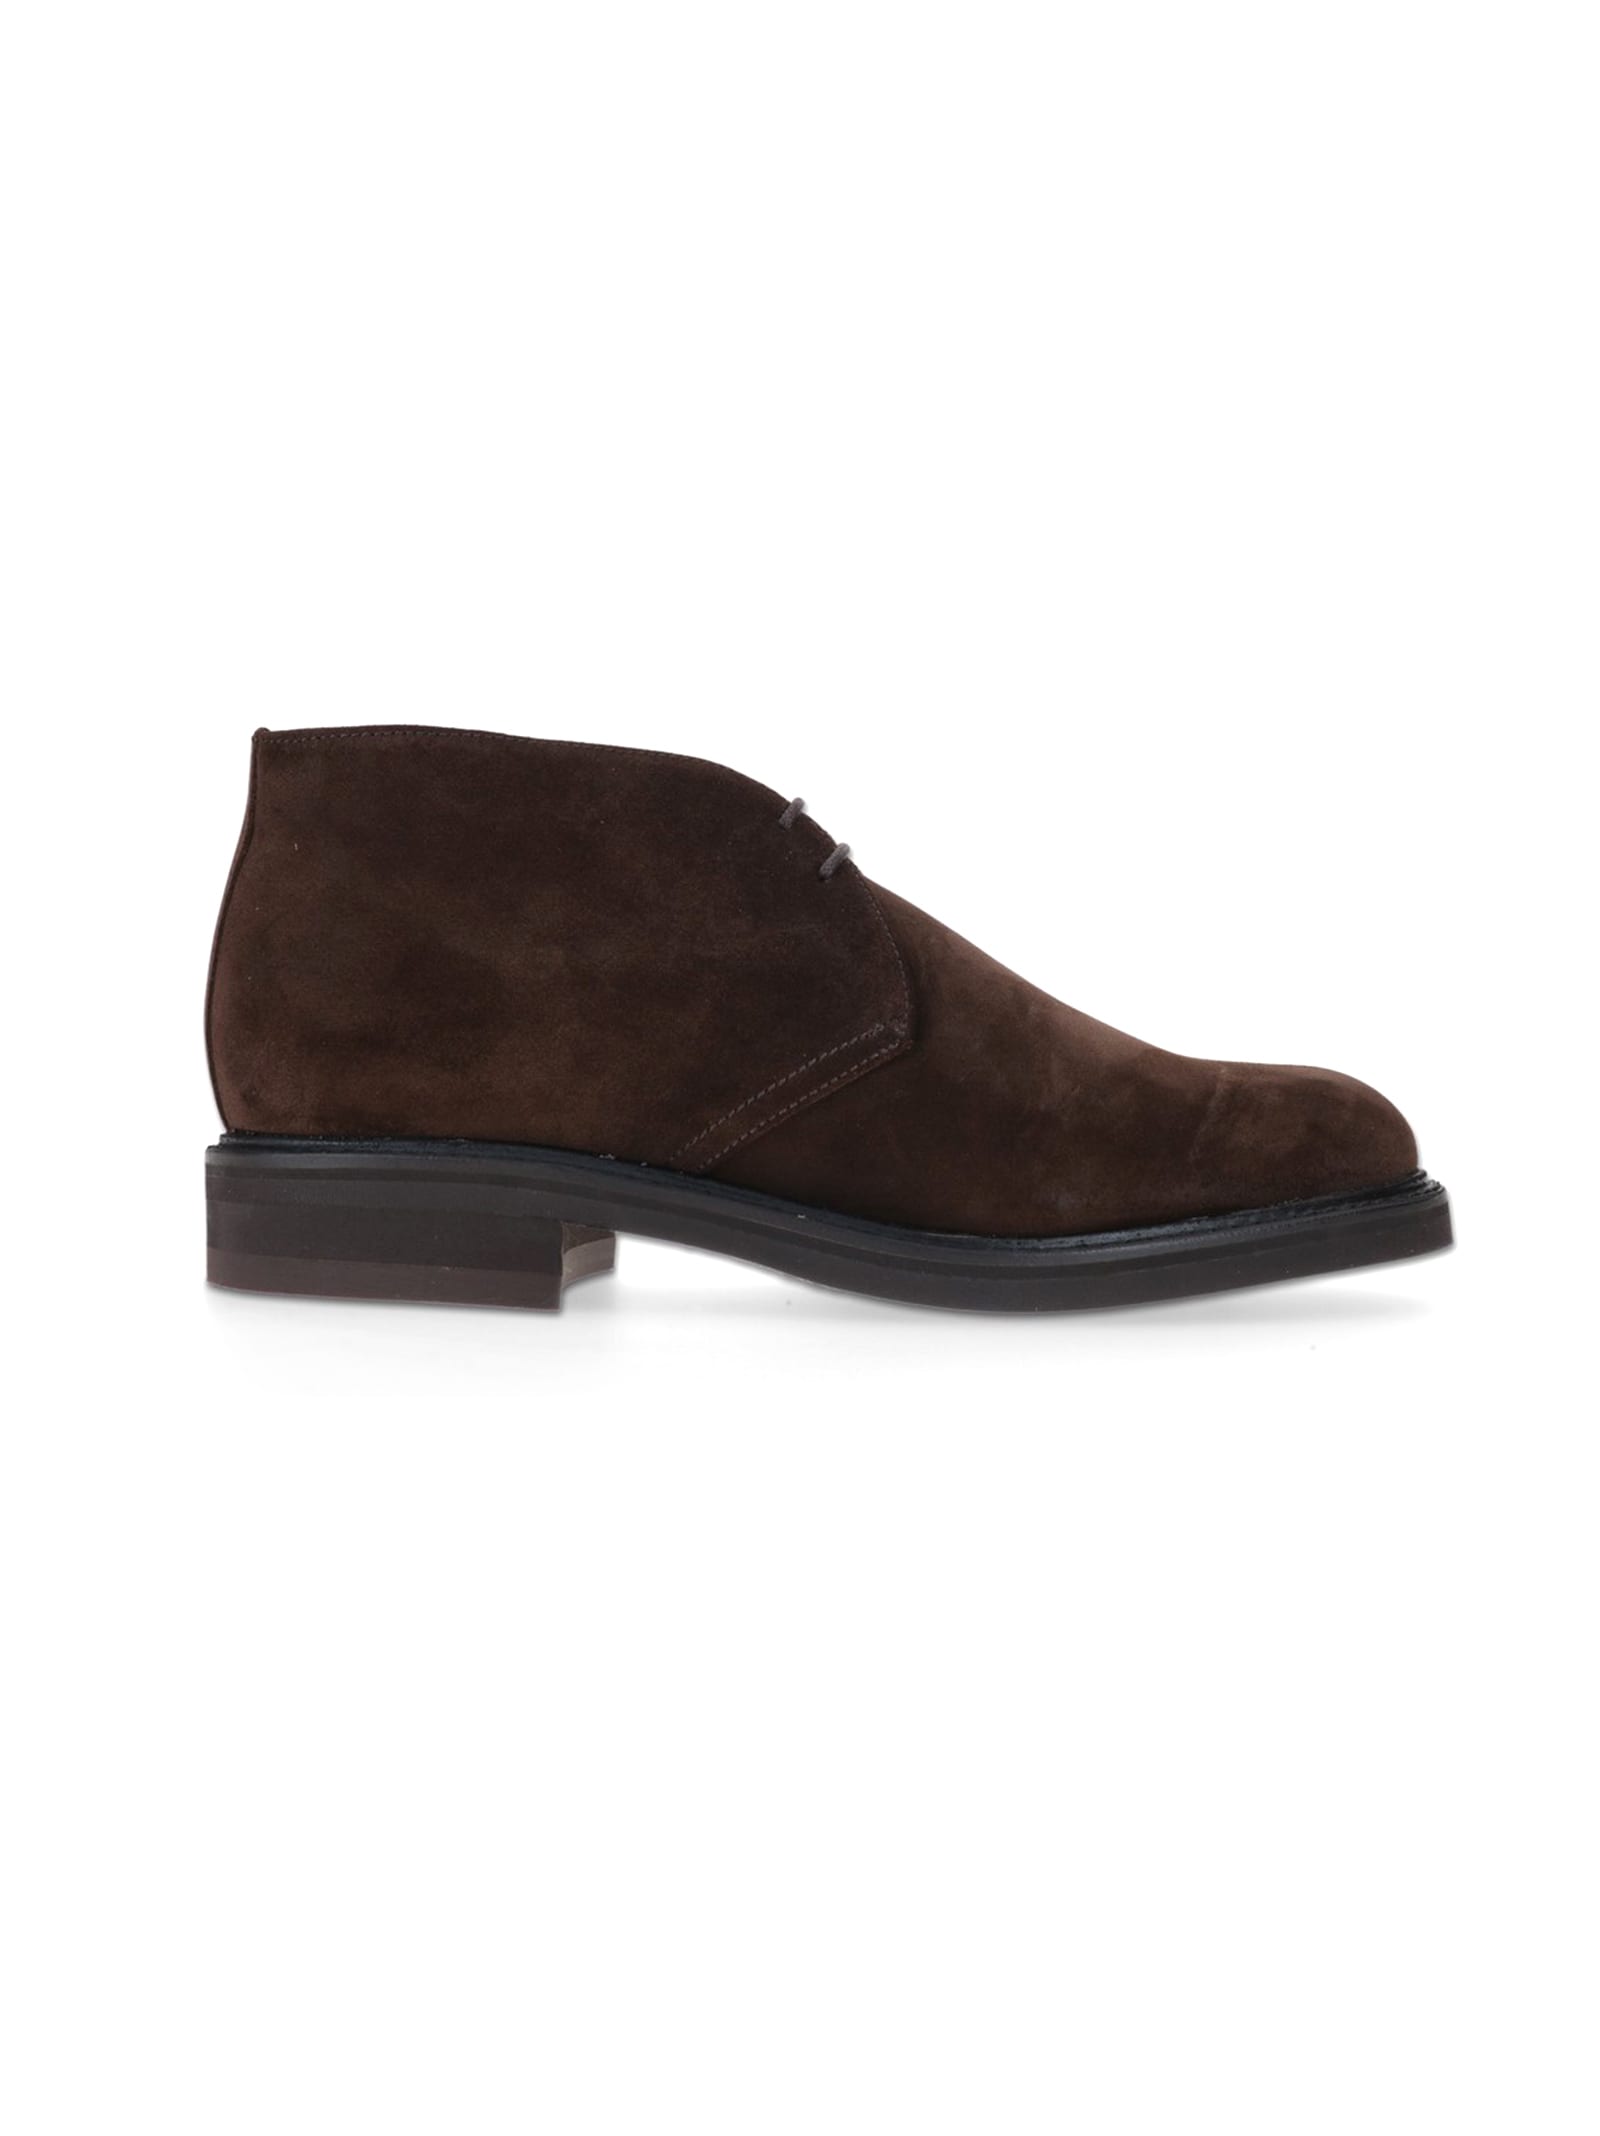 Berwick 1707 Suede Ankle Boot